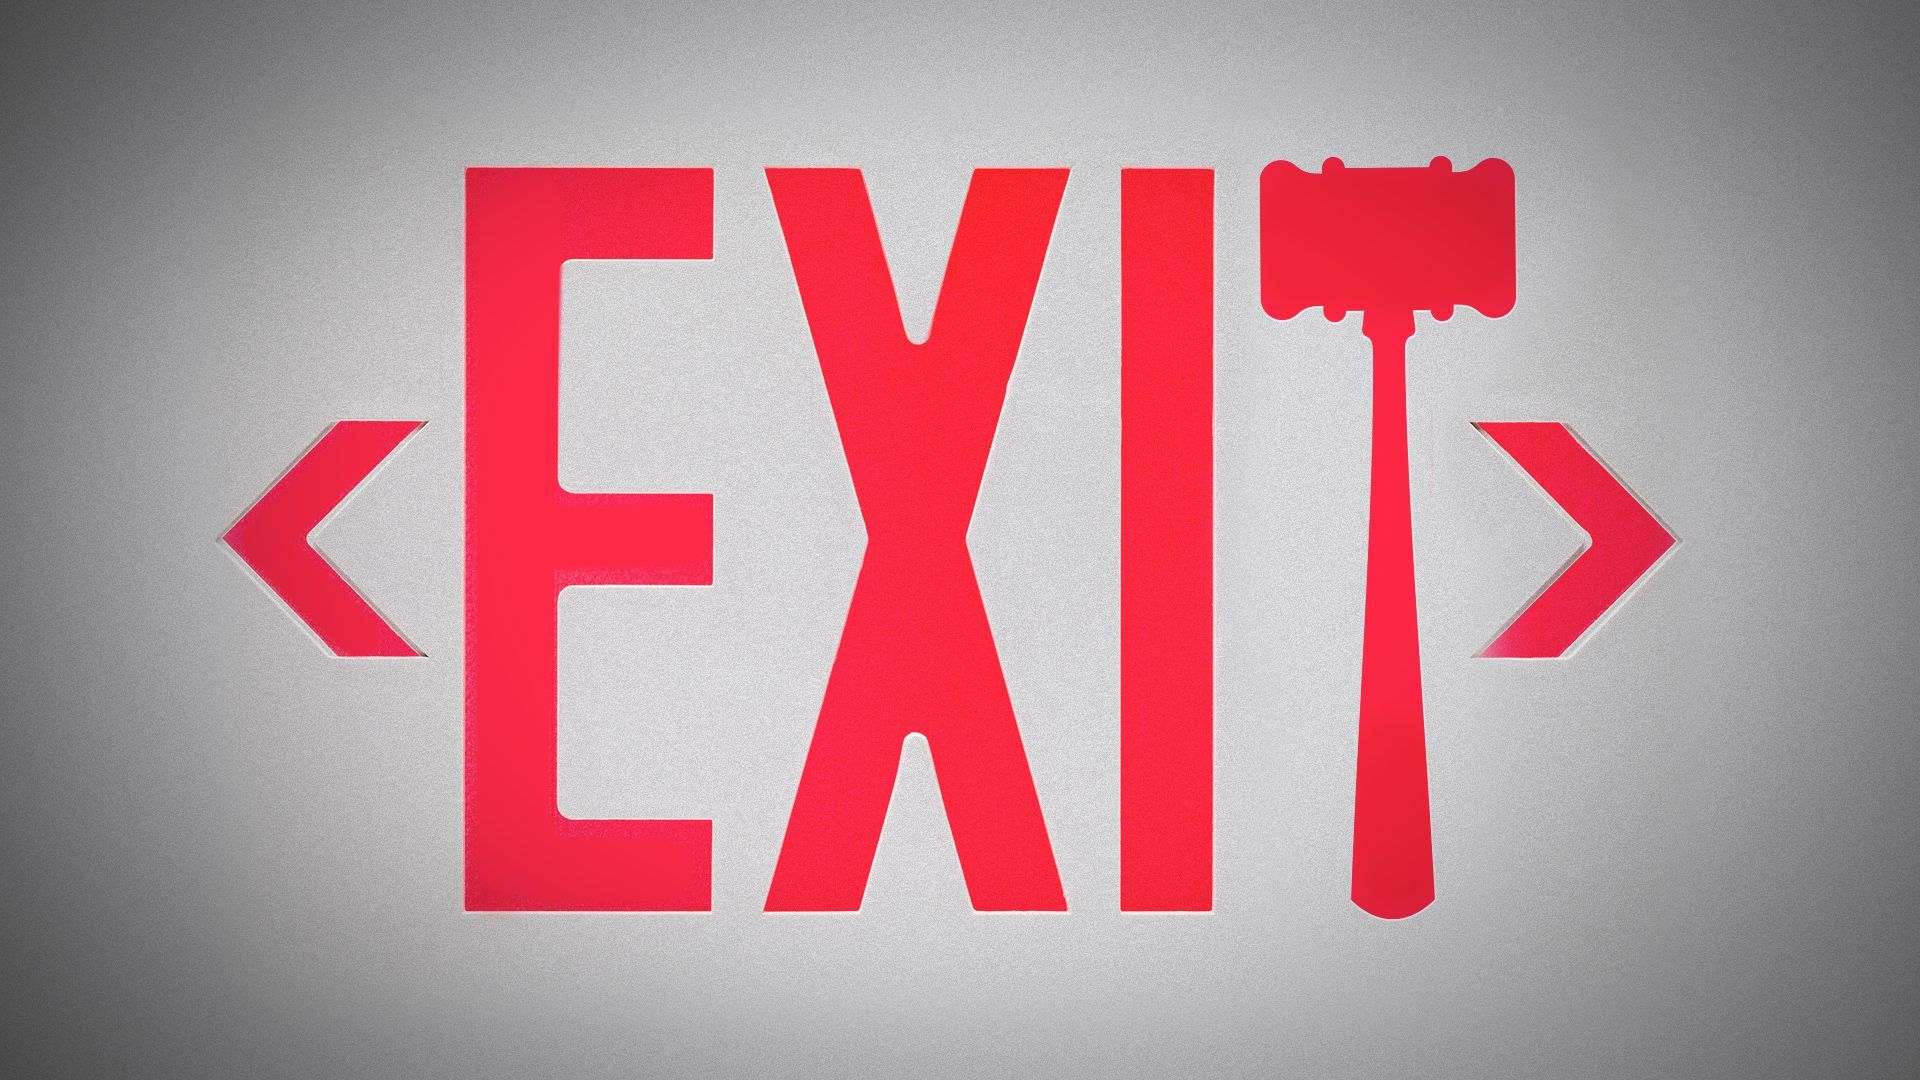 Illustration of an EXIT sign with a gavel forming the "T"